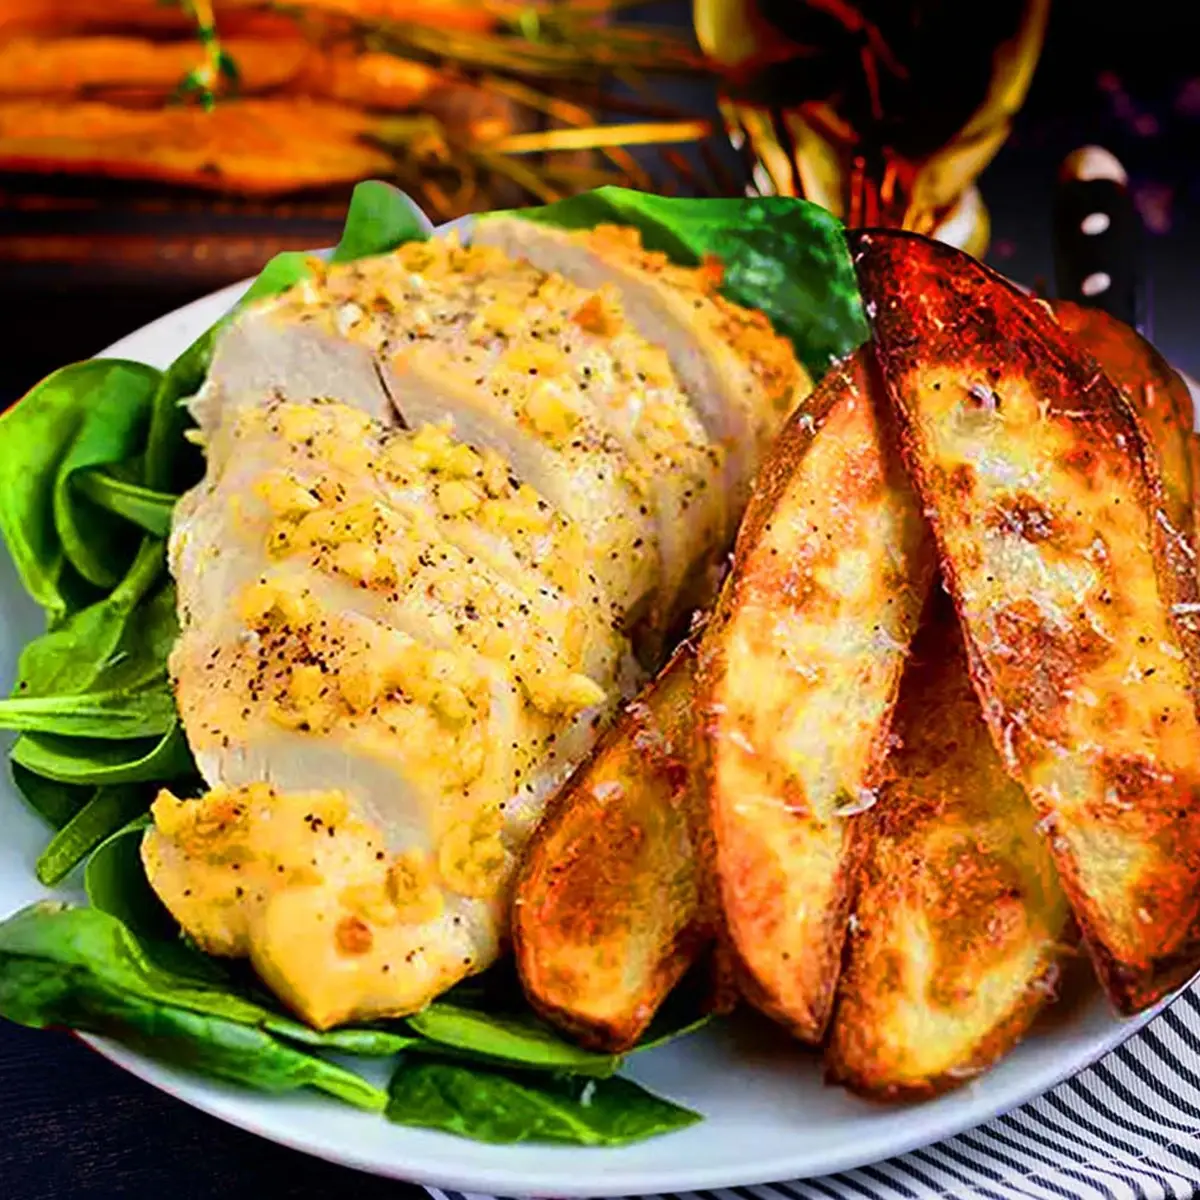 Parmesan Garlic Chicken with Roasted Wedges Recipe Card